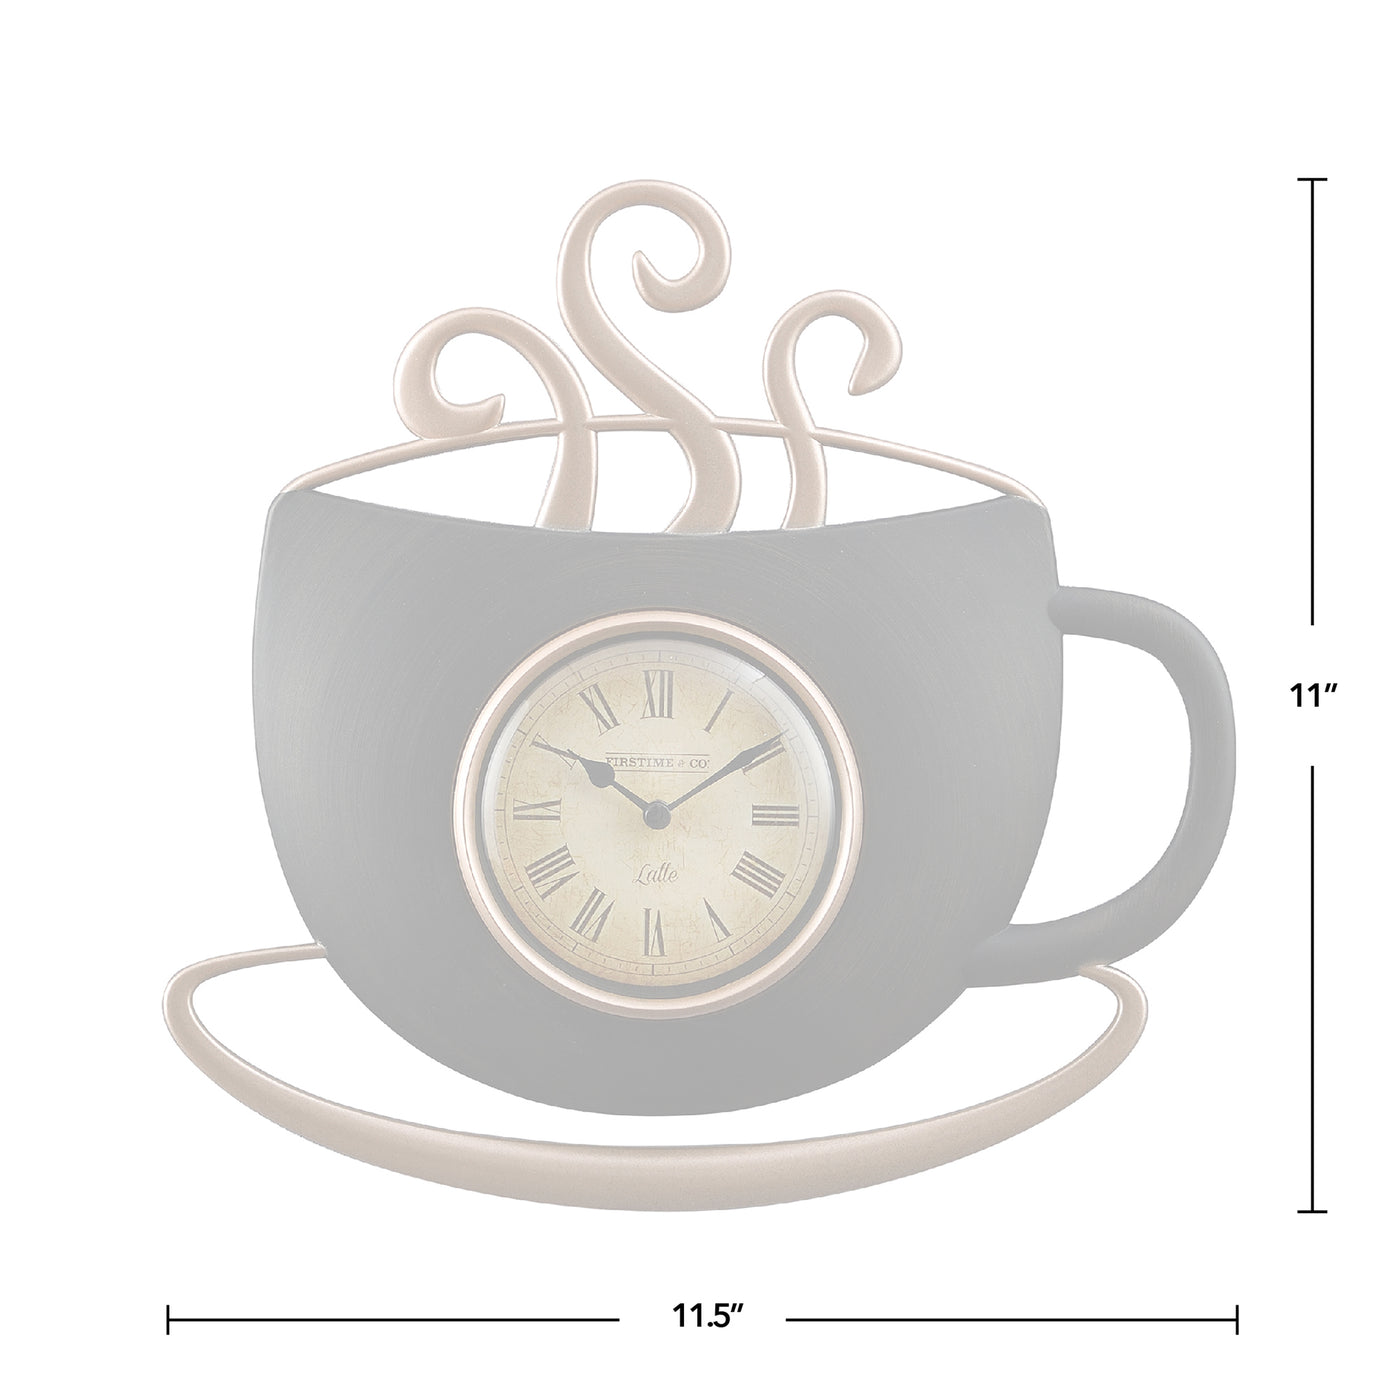 FirsTime & Co. Bronze Latte Cup Wall Clock, Farmhouse Style, Made of Plastic